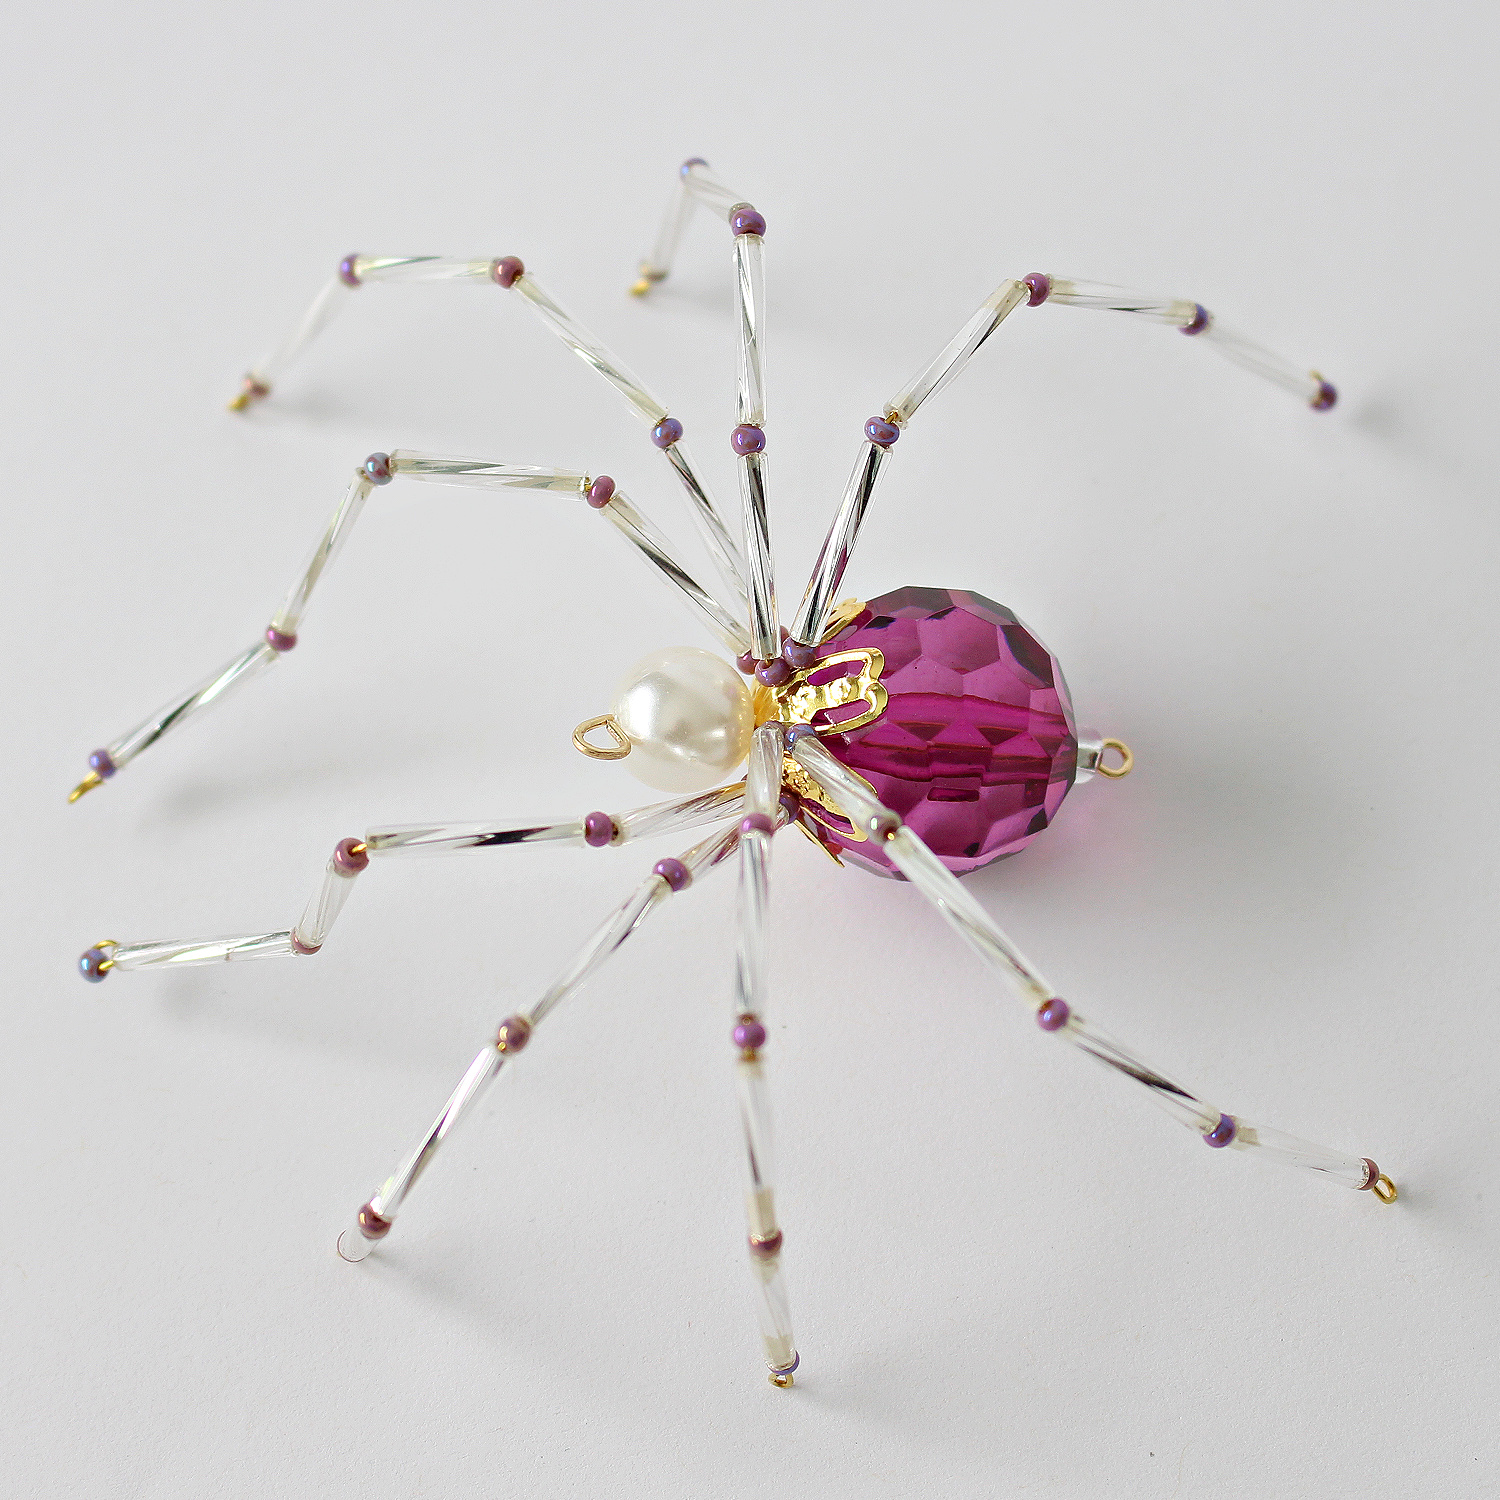 Beaded Christmas Spider Ornaments for Sale